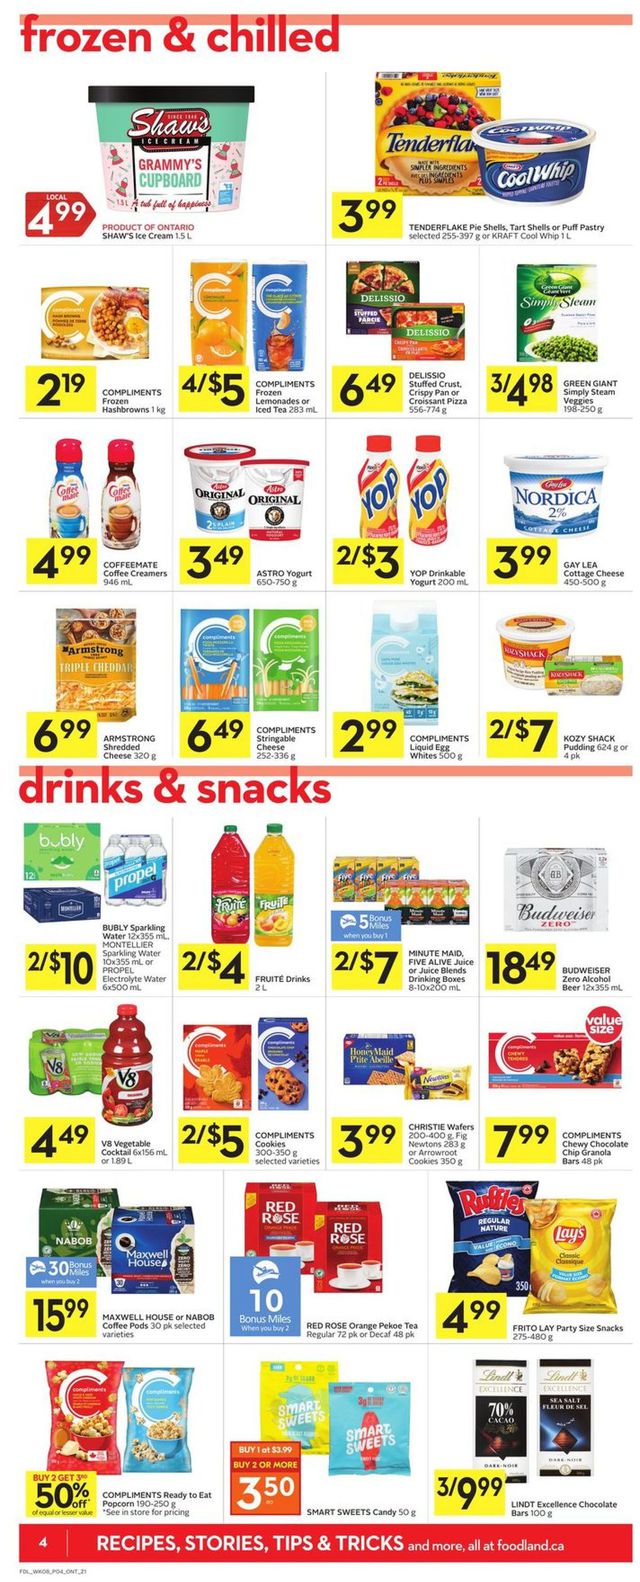 Foodland Flyer from 06/23/2022